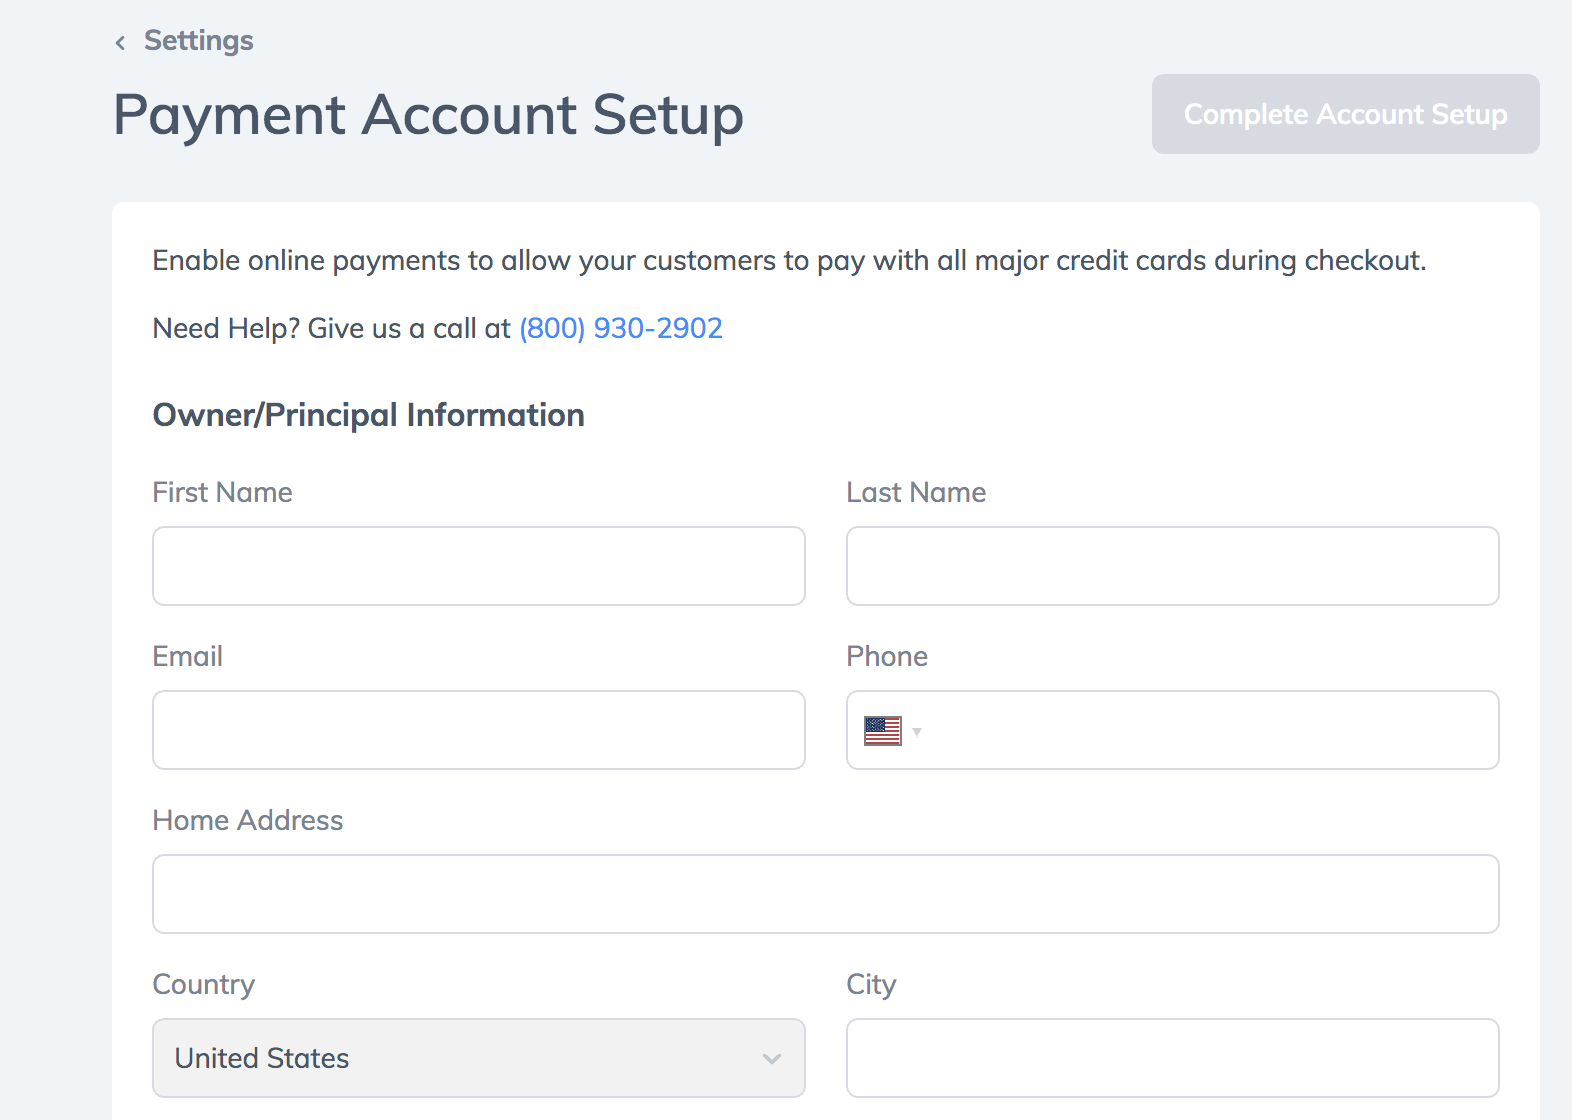 settings-payments-setup-form.png